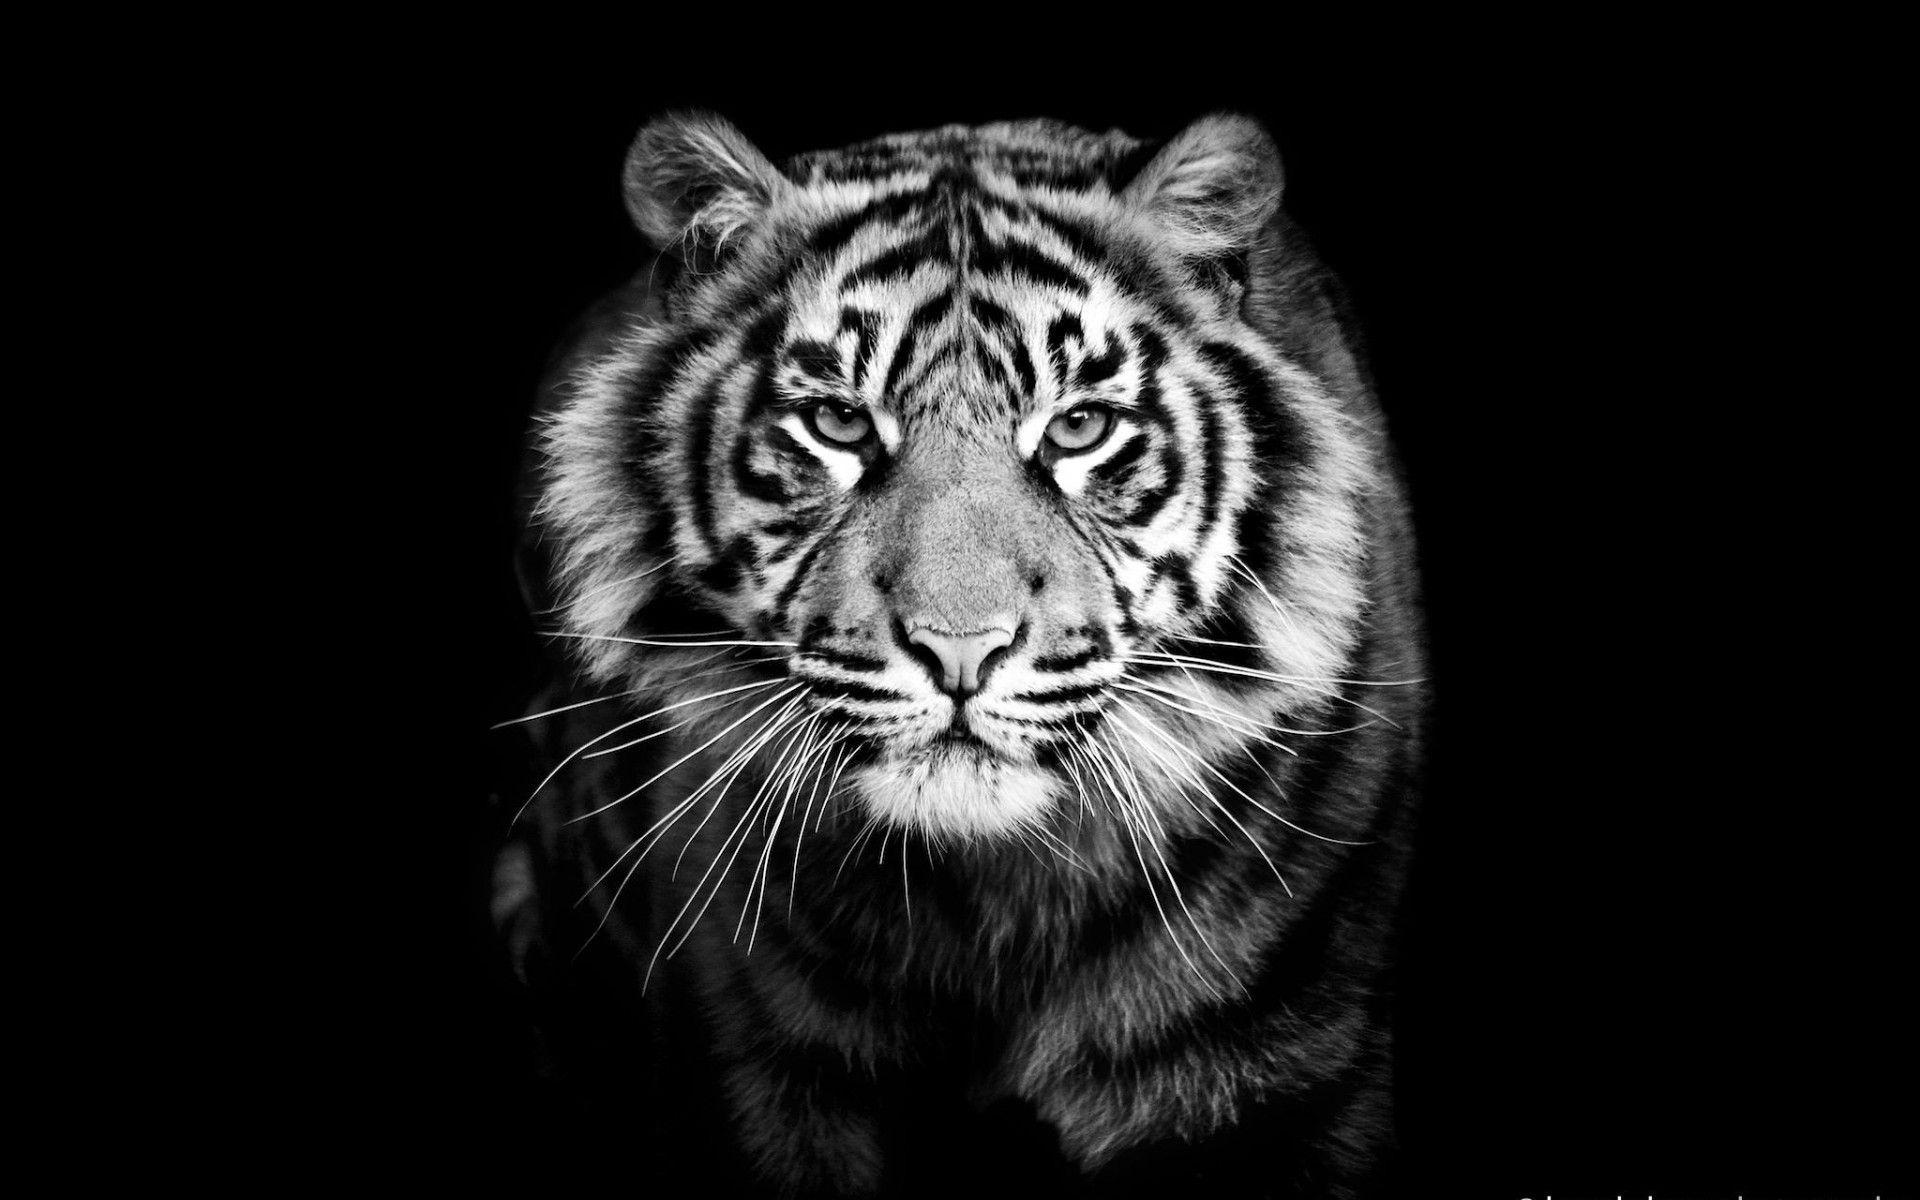 Tiger Image Wallpapers